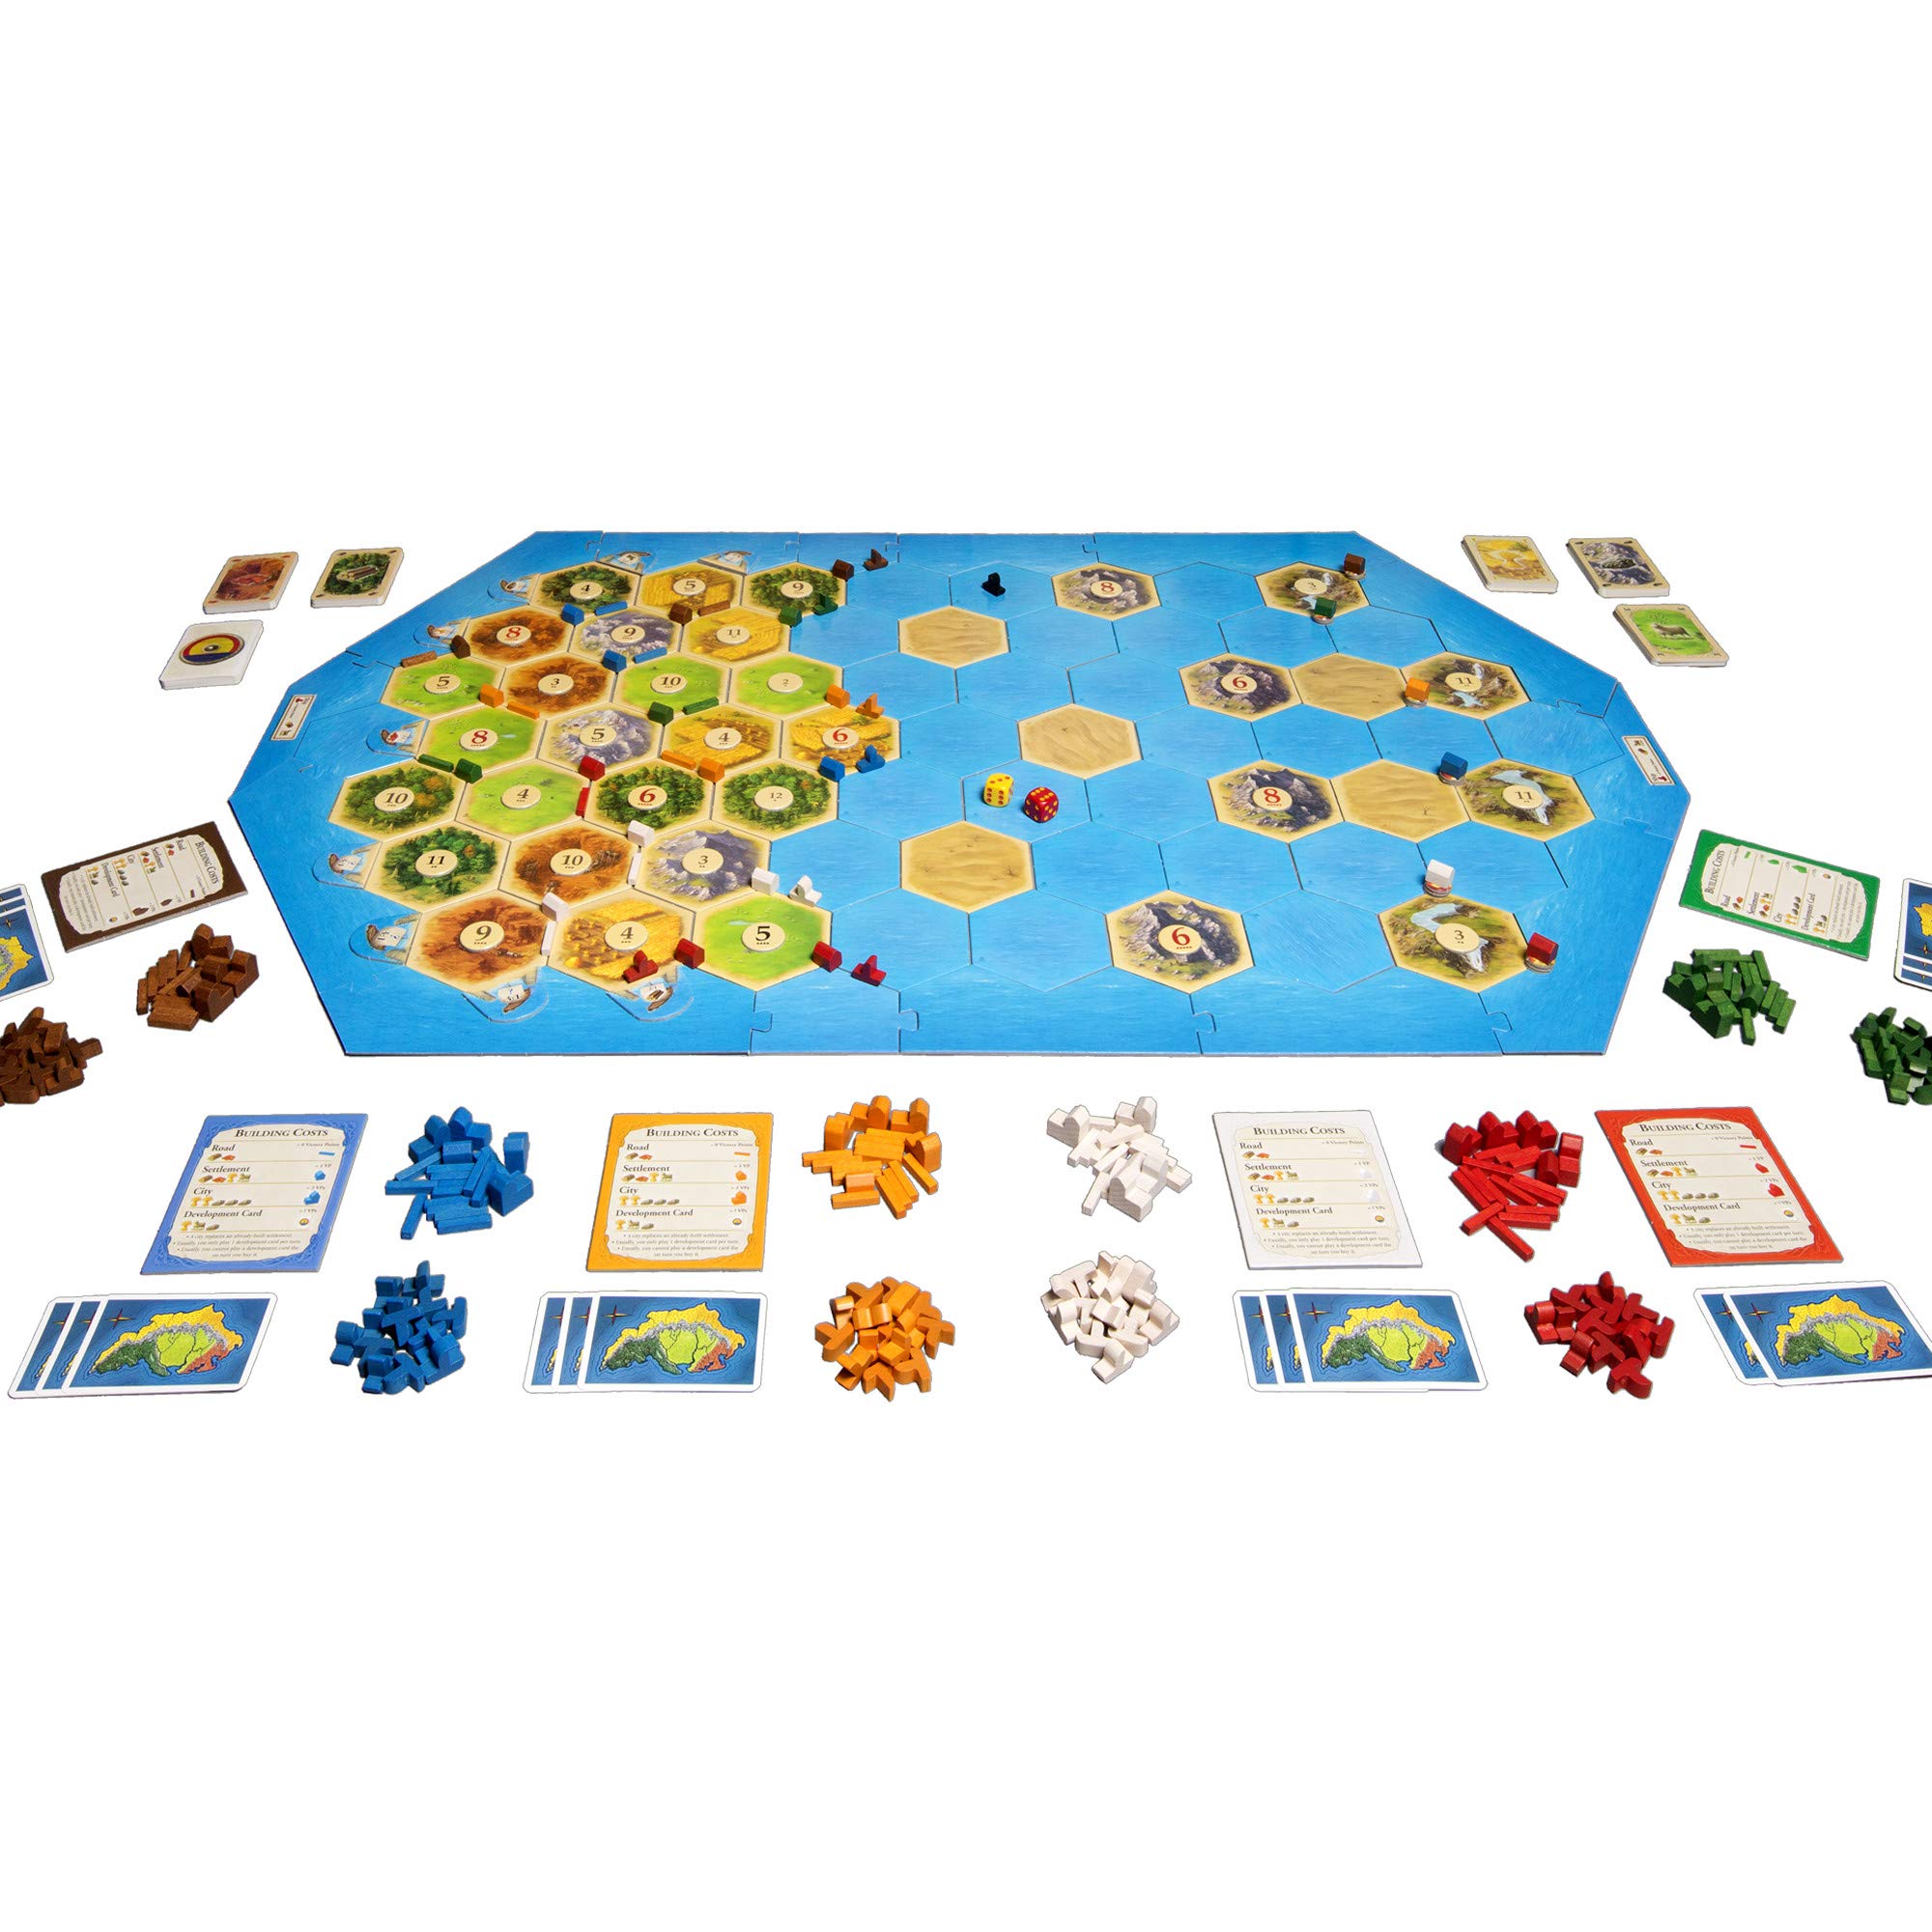 CATAN Seafarers Board Game Extension Allowing a Total of 5 to 6 Players for The CATAN Seafarer Expansion | Board Game for Adults and Family | Adventure Board Game | Made by Catan Studio